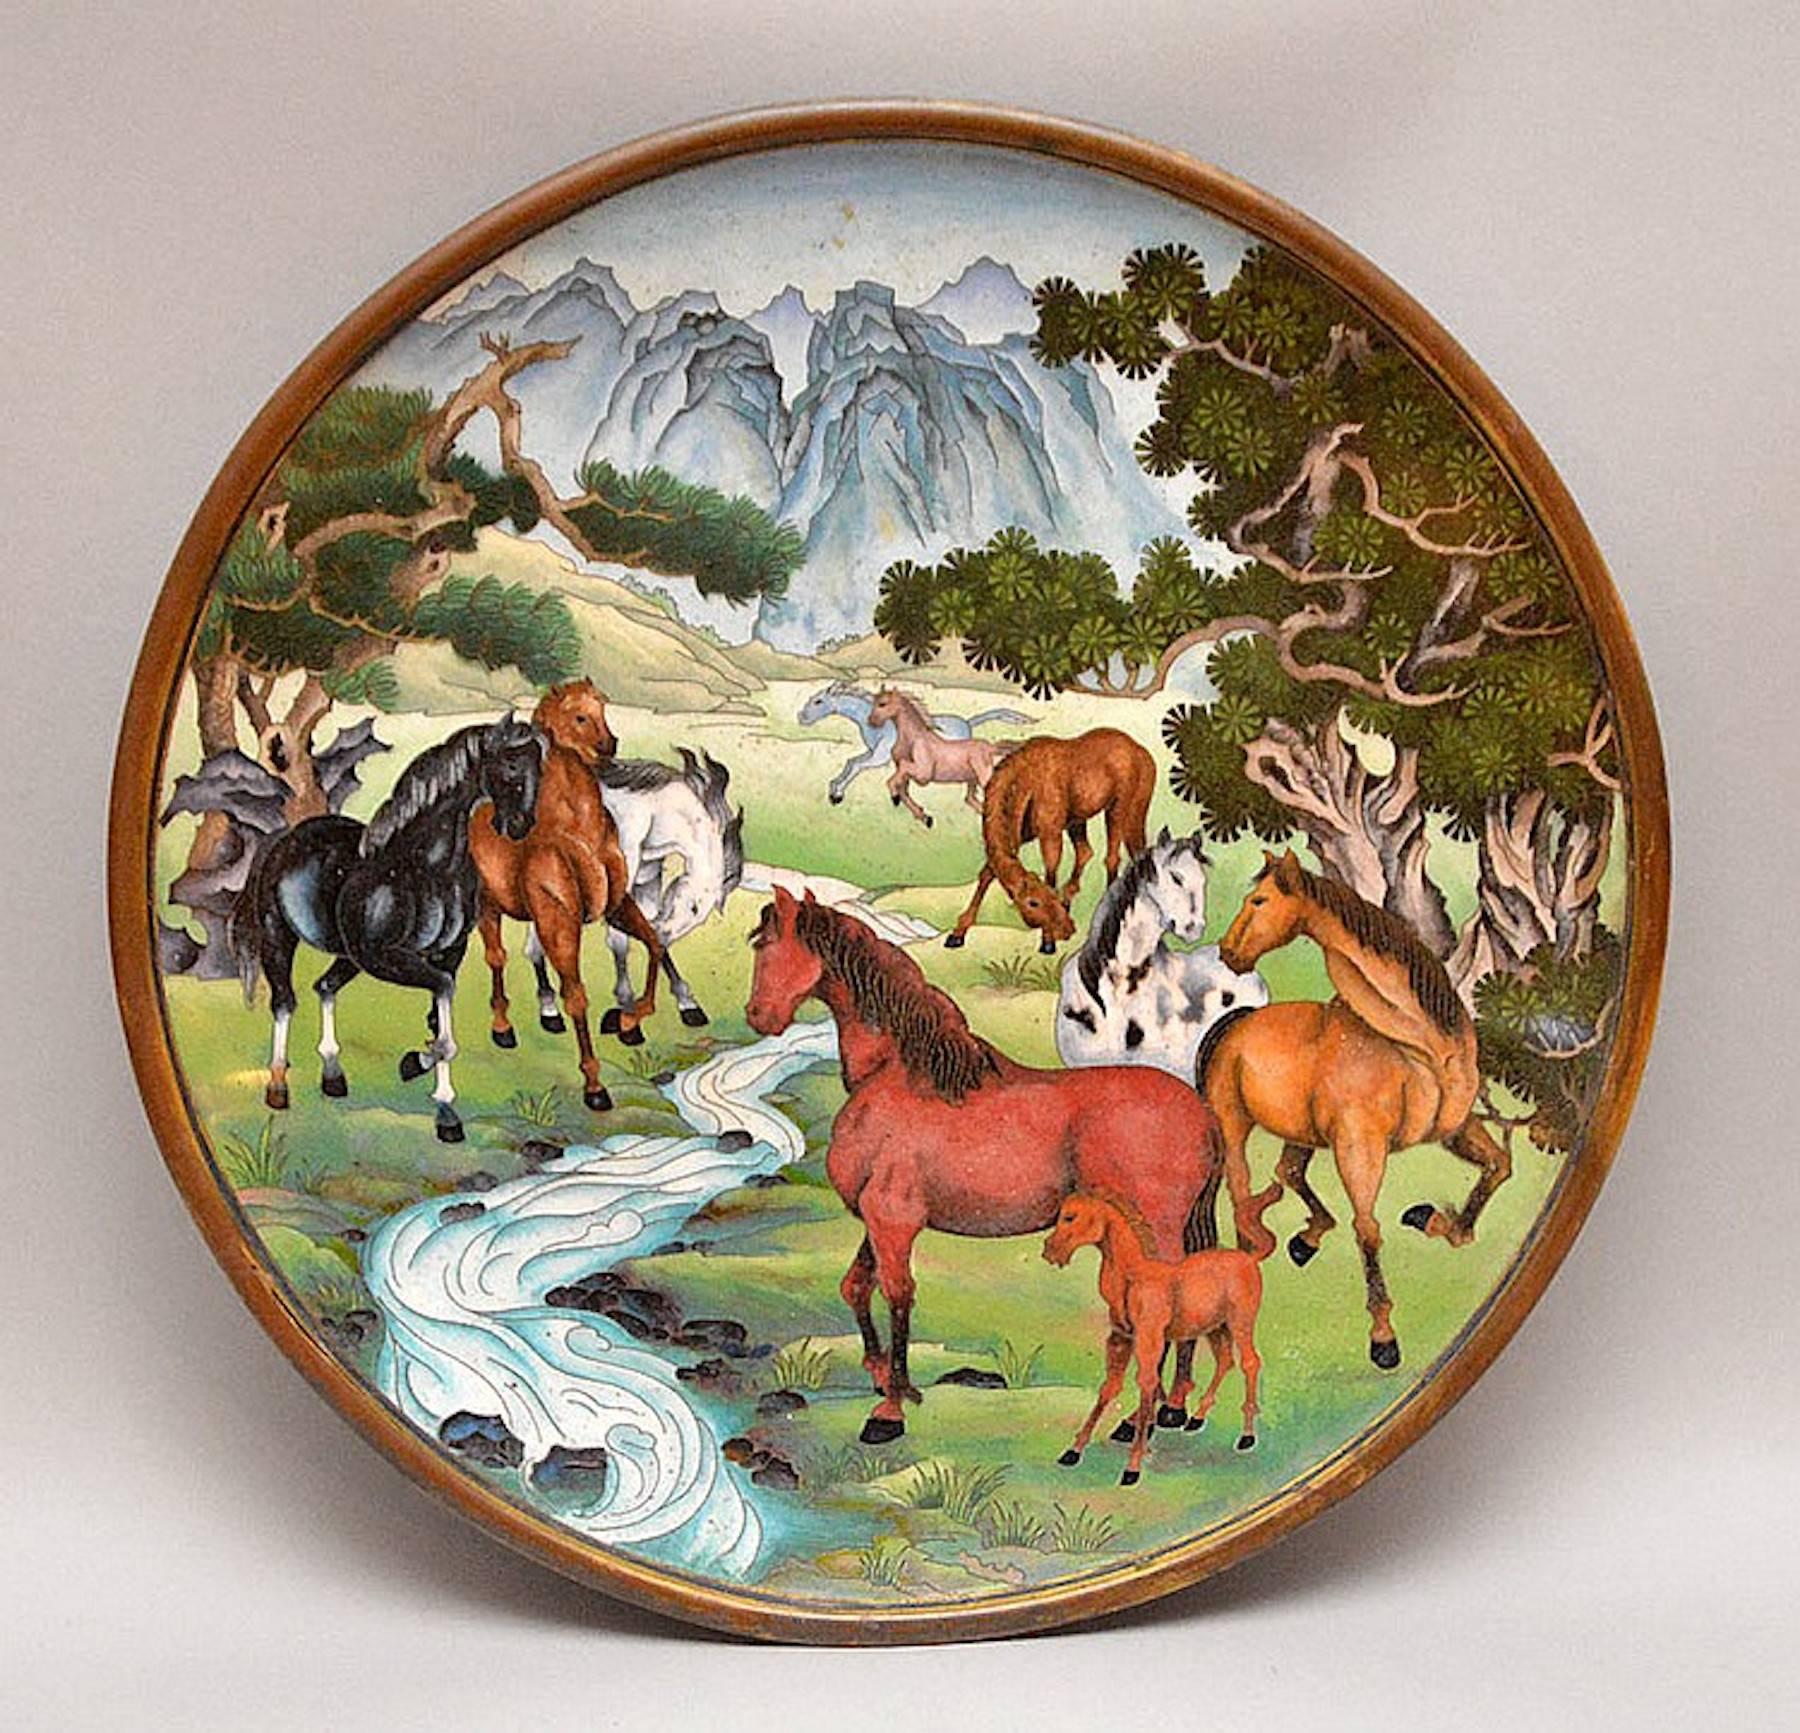 Unusual equestrian motif cloisonné charger, china 20th century, nine multicolored horses and one brown colt, standing in a lush mountainous landscape with a river. A fine example of late 20th-century Chinese cloisonné or enamel work.